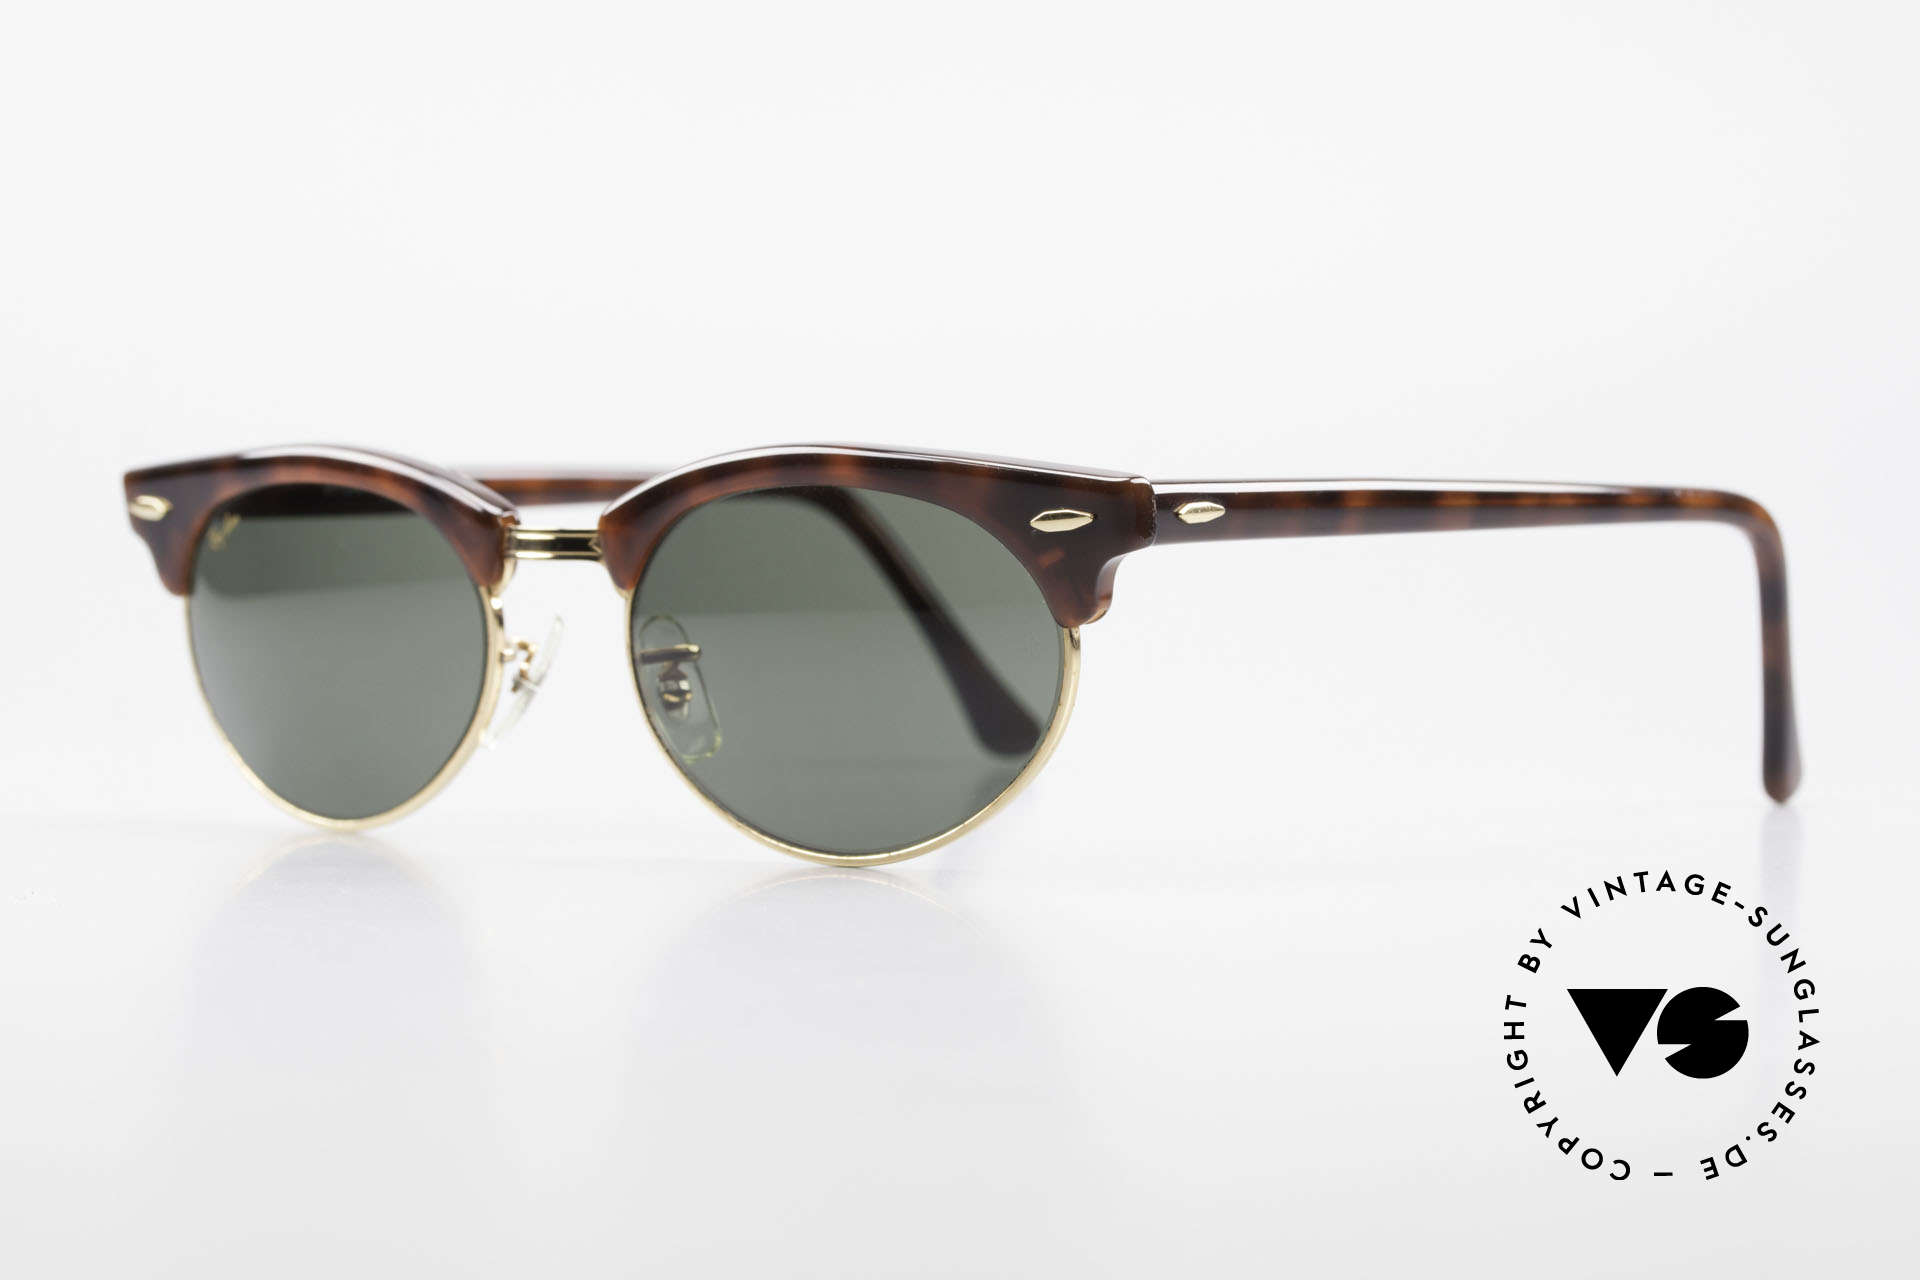 Ray Ban Clubmaster Oval 80's Bausch & Lomb Original, Bausch&Lomb G15 quality lenses; 100% UV prot., Made for Men and Women